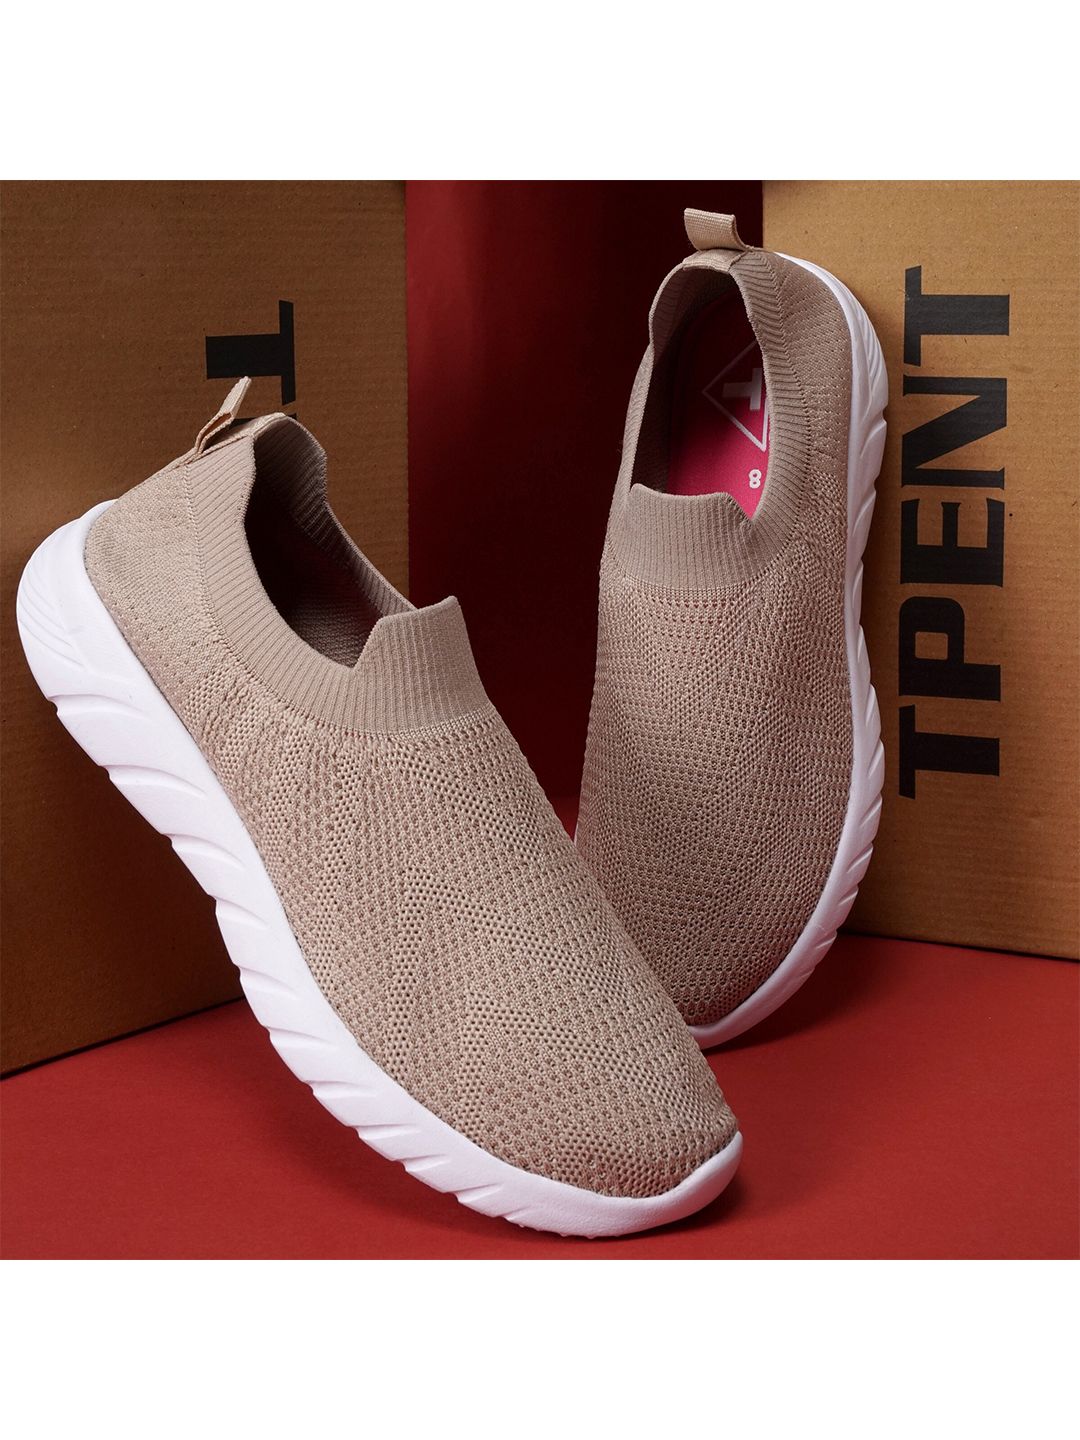 TPENT Women Beige Mesh Running Non-Marking Shoes Price in India